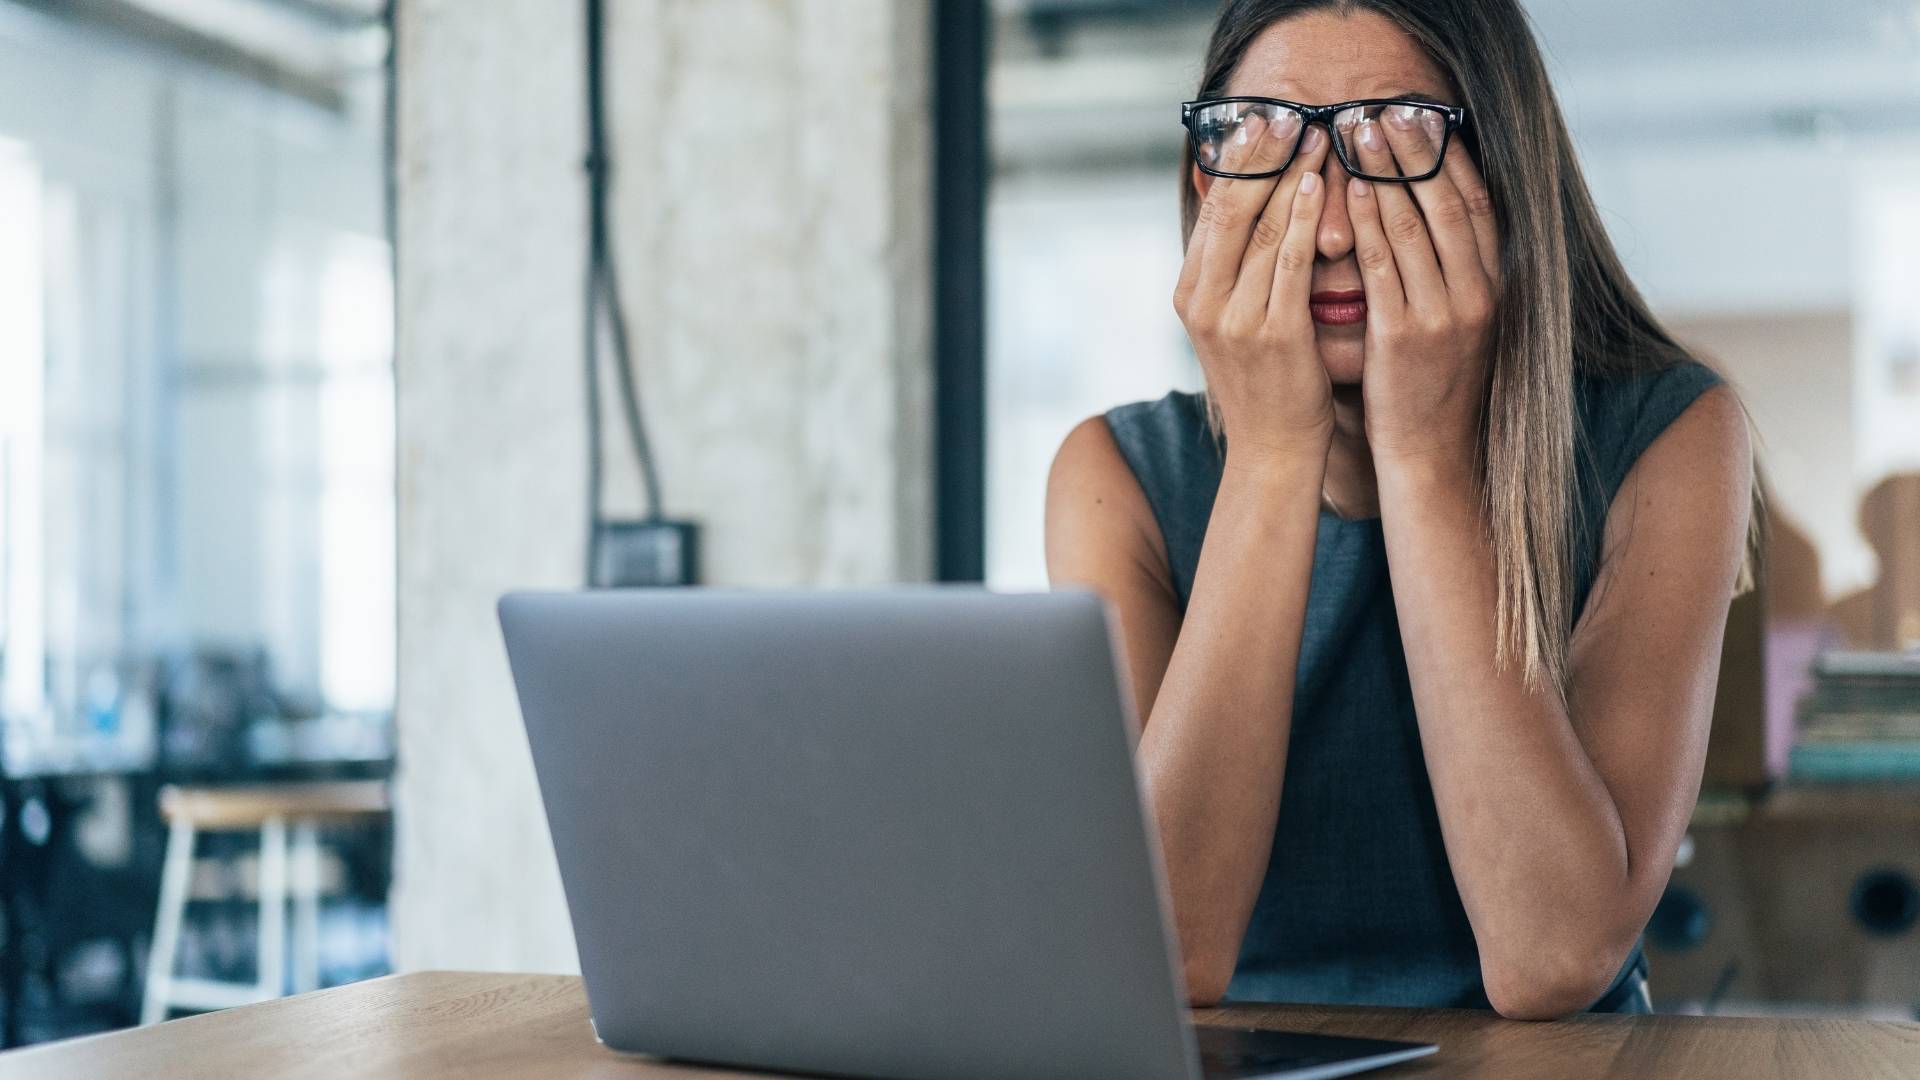 A tired office woman rubbing her eyes in front of her laptop